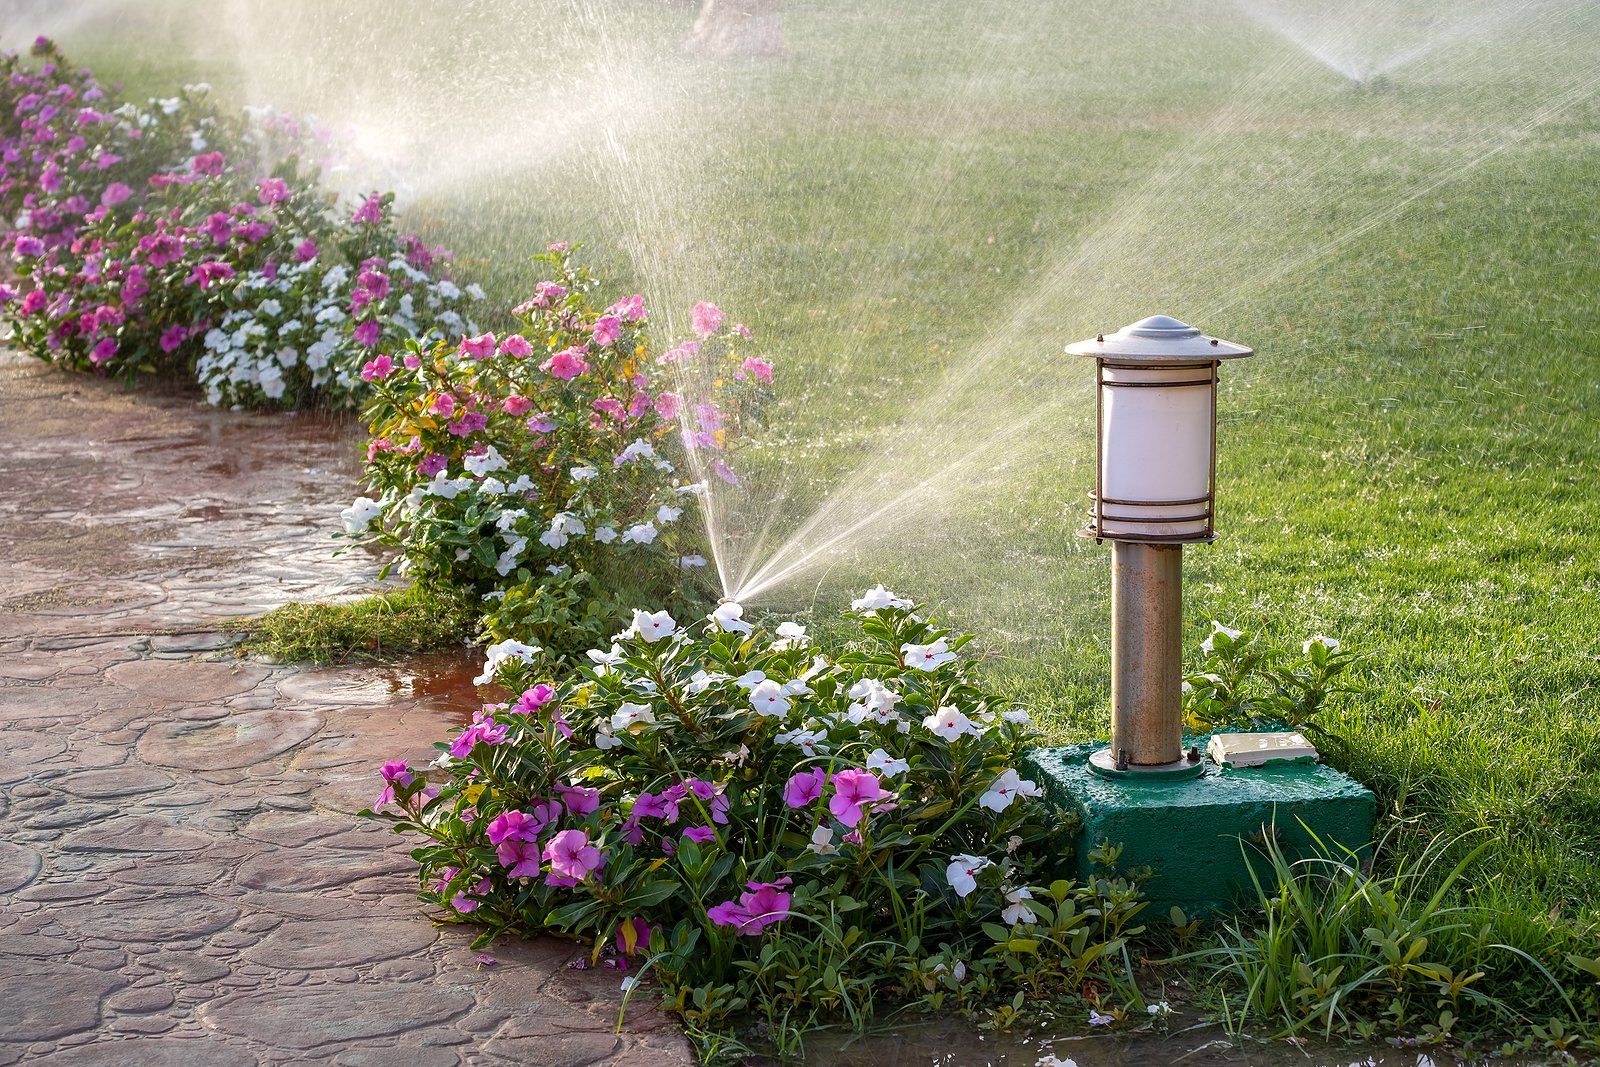 Irrigation Services Near You